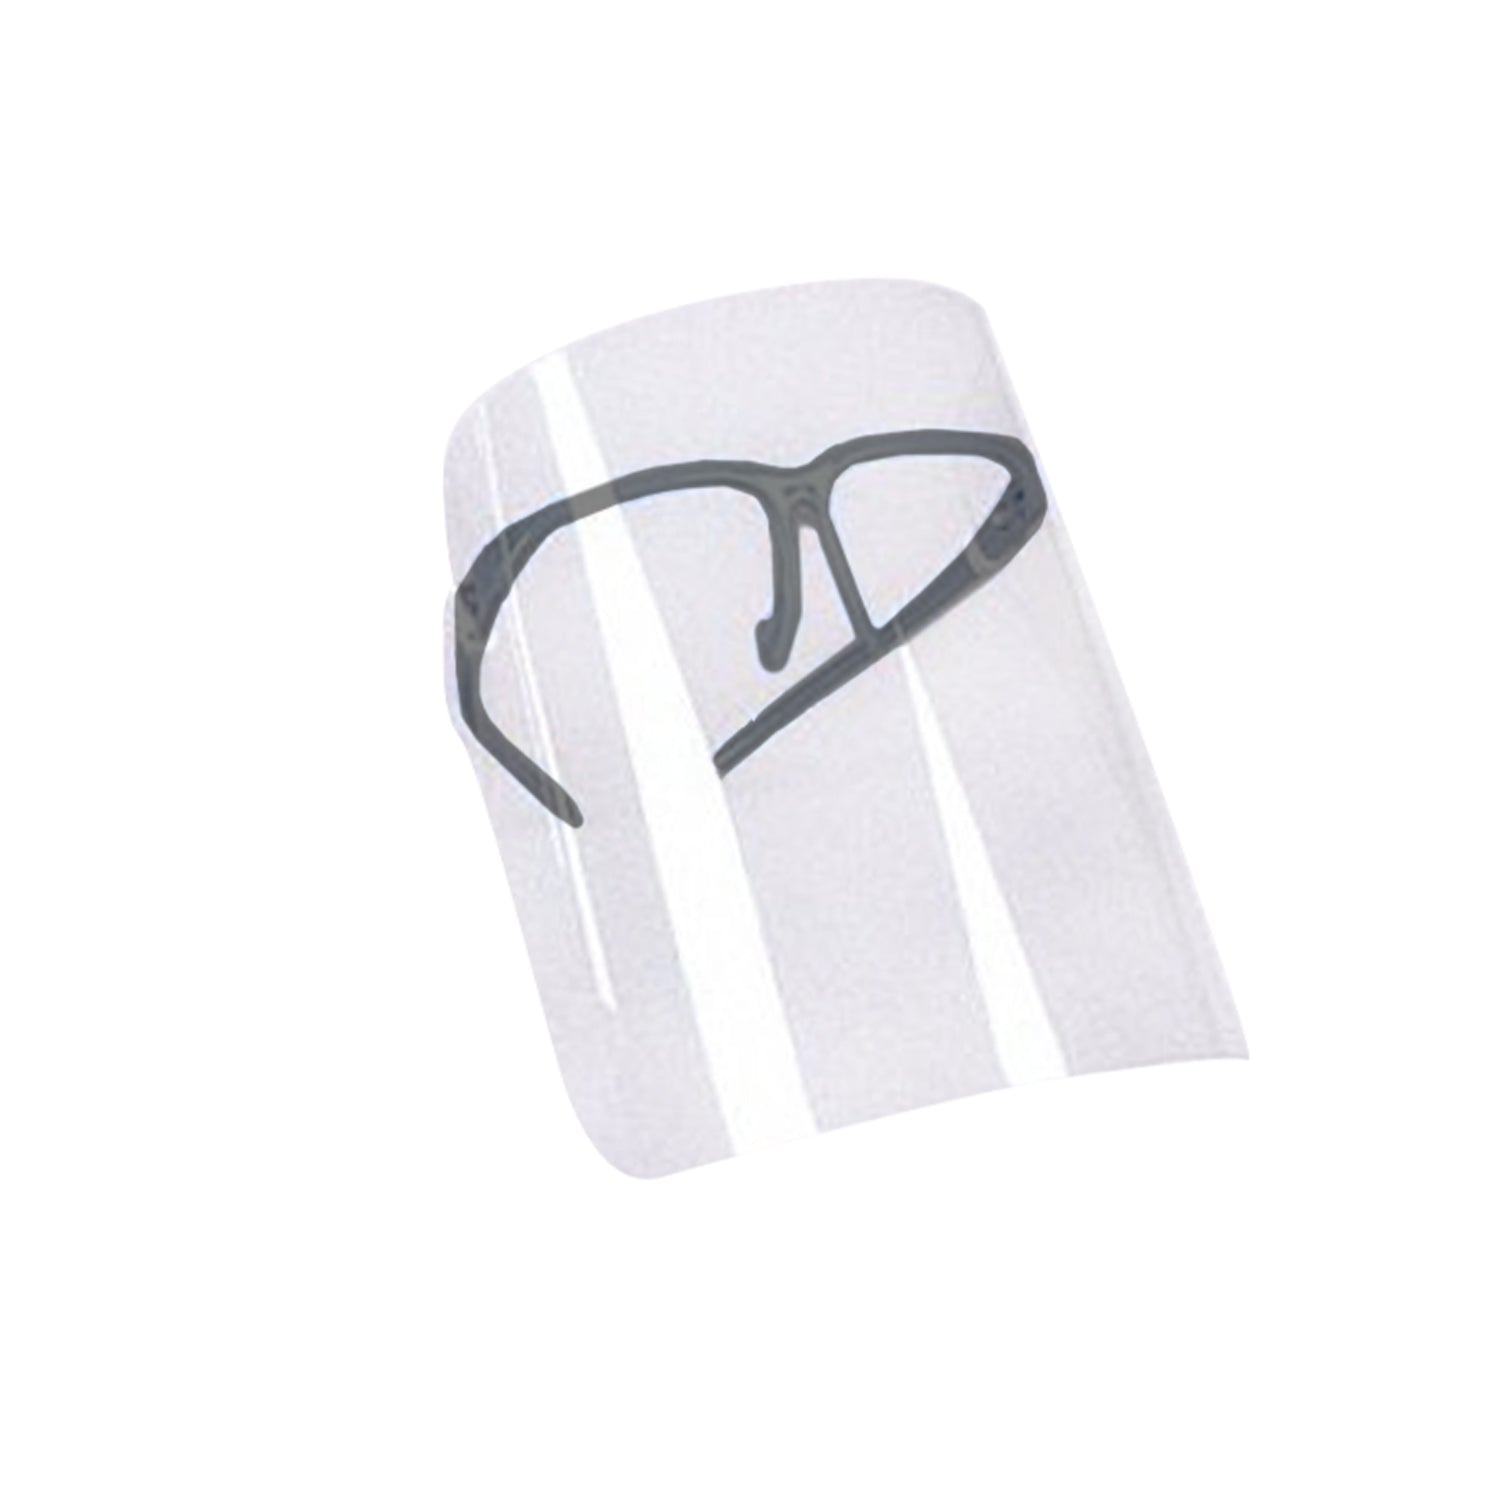 Face Protection Shields with anti-fog surface. Mask with full protection protects your eyes from droplets. Offers 180 degree protection. Made of durable acrylic materials. Comes with comfort fit acrylic glasses that can fit over most eye glasses.